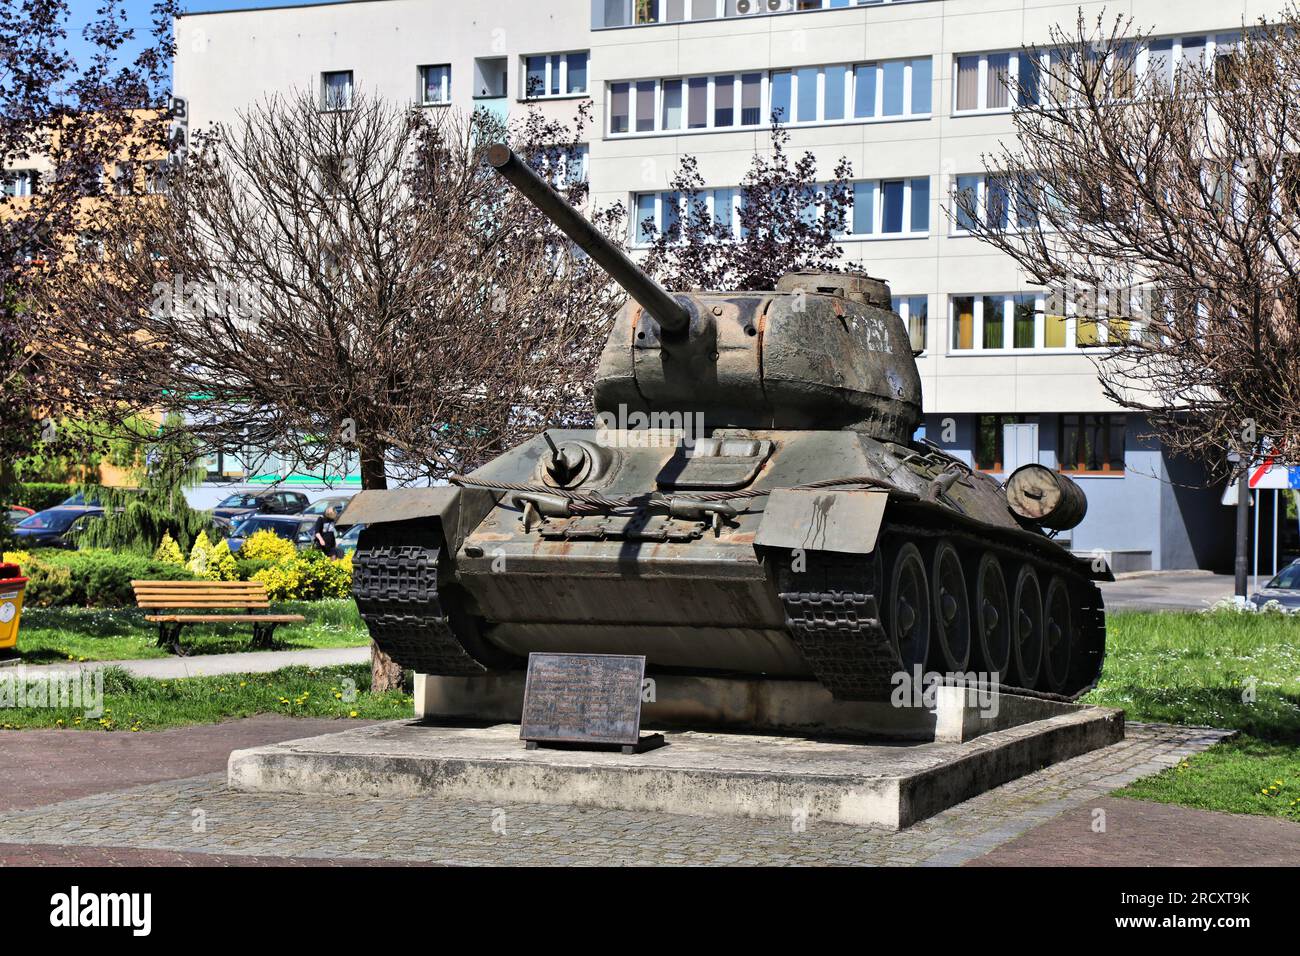 GLIWICE, POLAND - MAY 11, 2021: Historic T-34 tank monument in Gliwice city in Poland, one of largest cities of Upper Silesian metropolitan area. Stock Photo